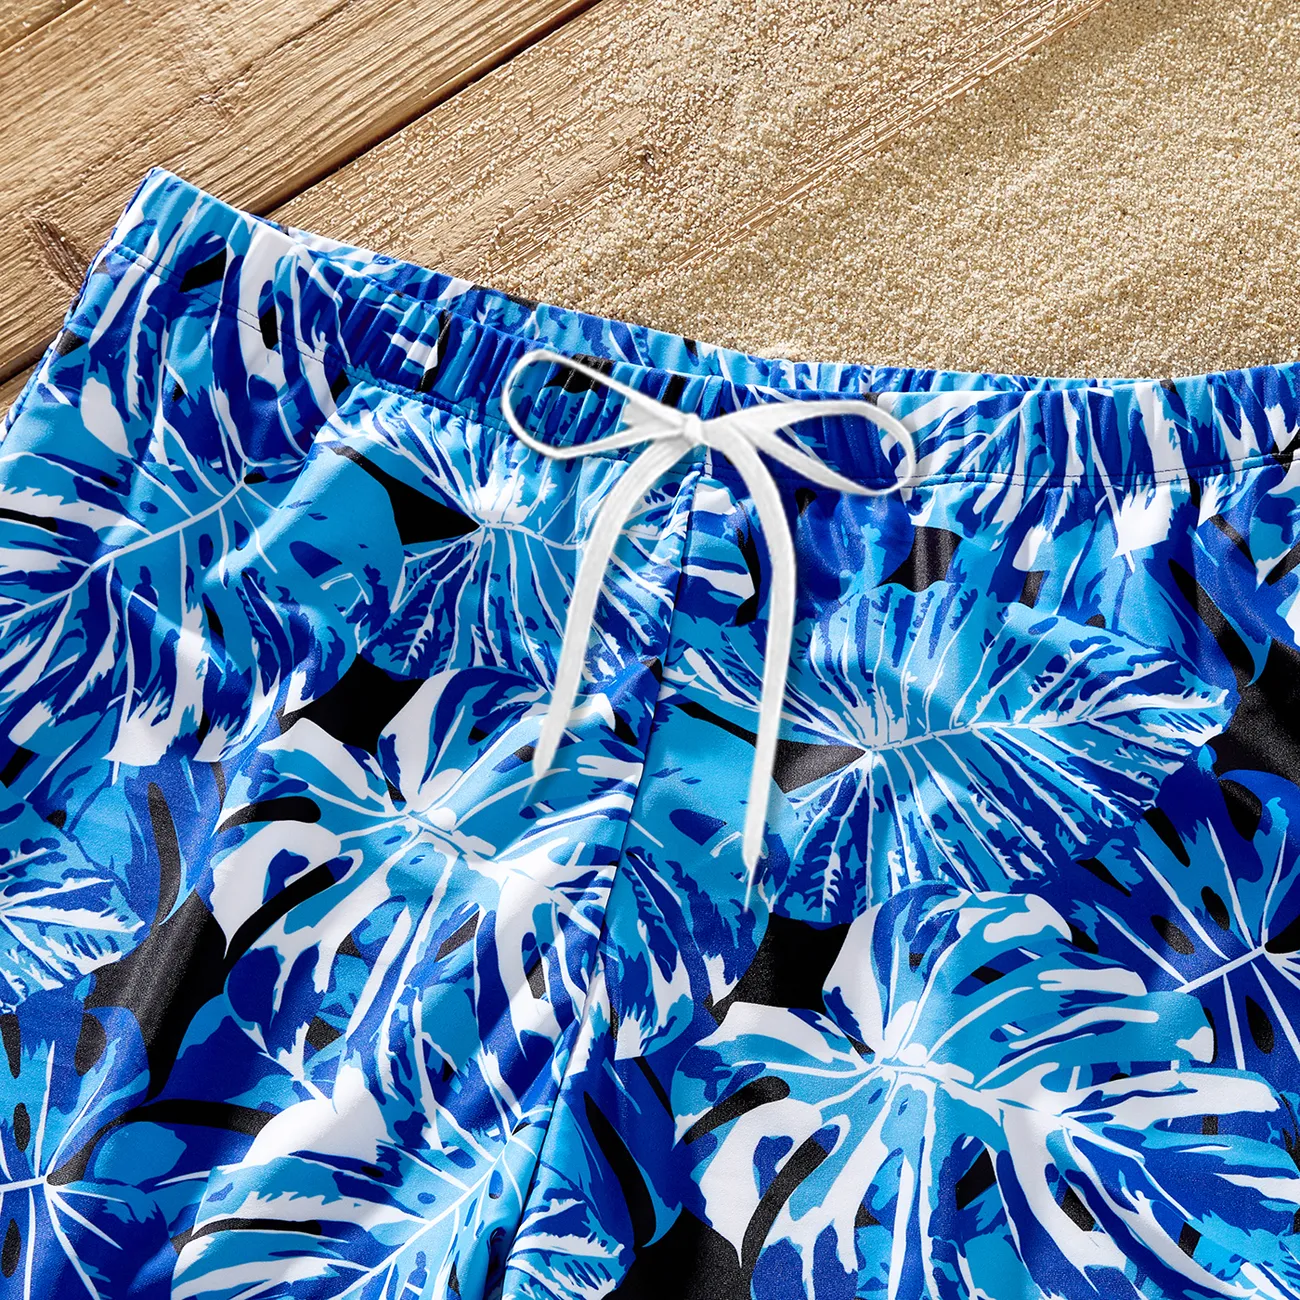 Family Matching Floral Drawstring Swim Trunks or Blue V Neck One-Piece Swimsuit (Quick-Dry) Blue big image 1